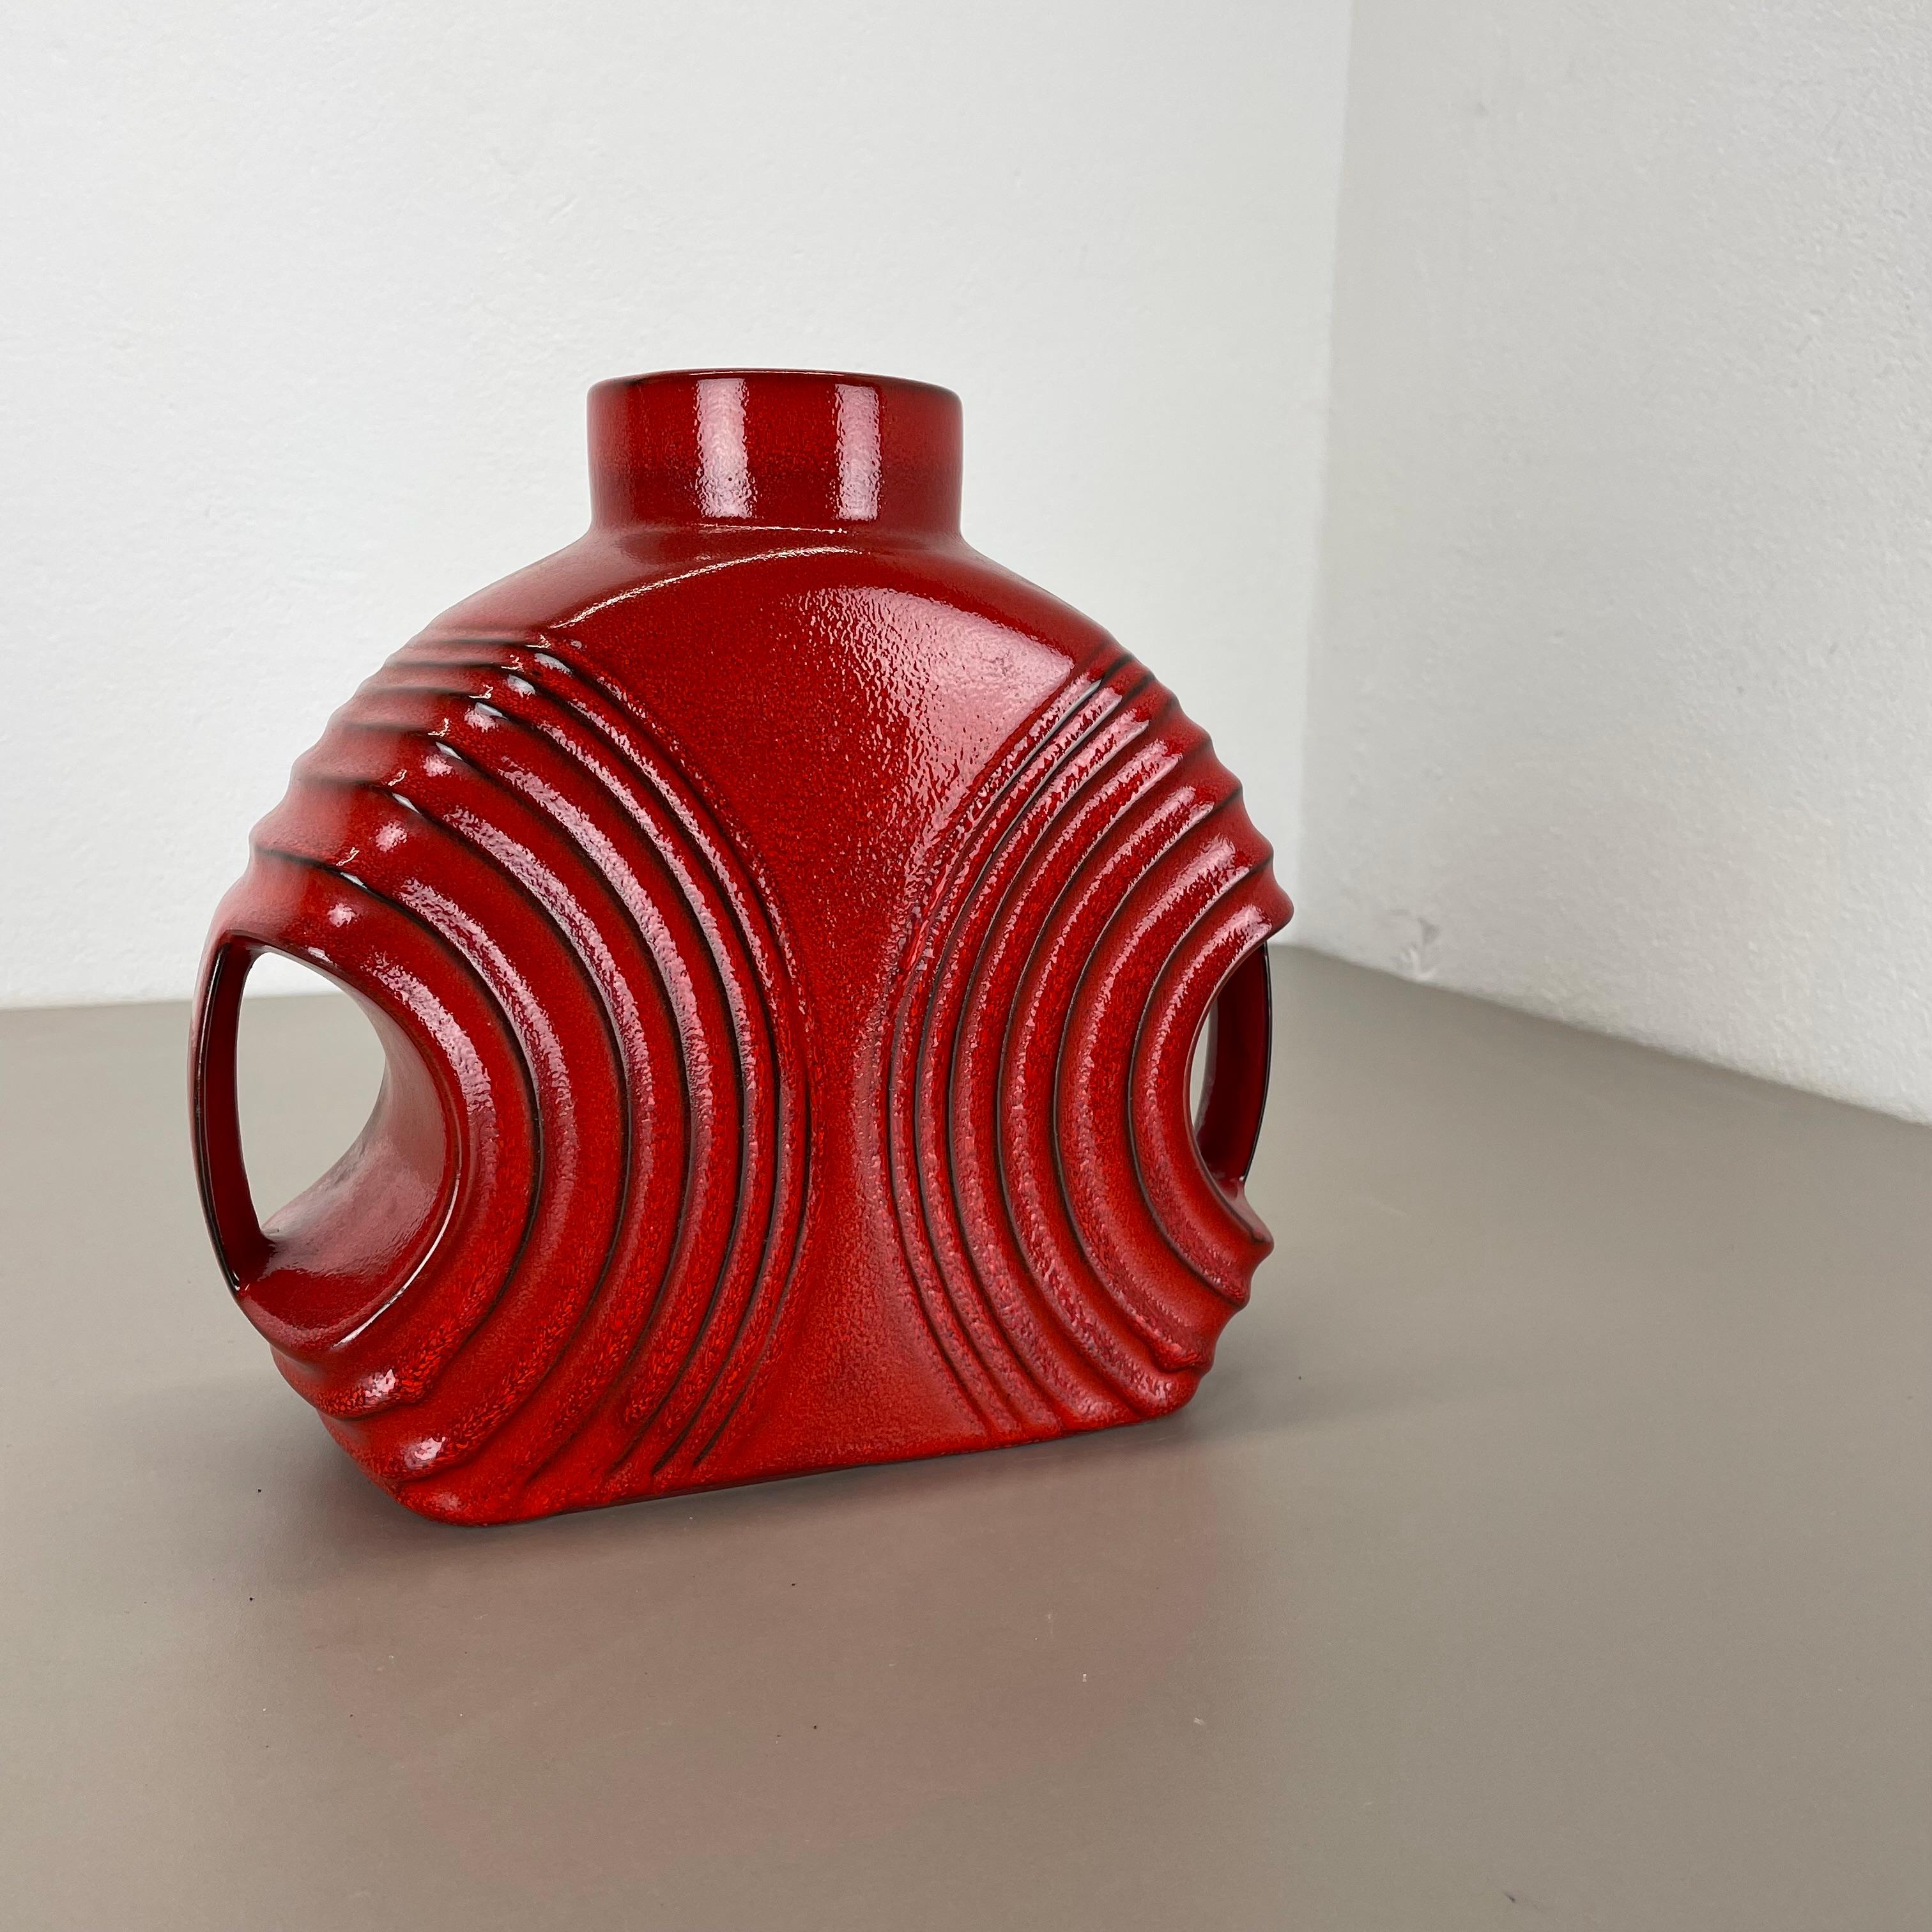 Article:

ceramic object


Producer:

Steuler, Germany


Design:

Cari Zalloni



Decade:

1970s


Description:

These original vintage ceramic object was produced in the 1970s in Germany. It is made of ceramic pottery in red tone. Super rare in